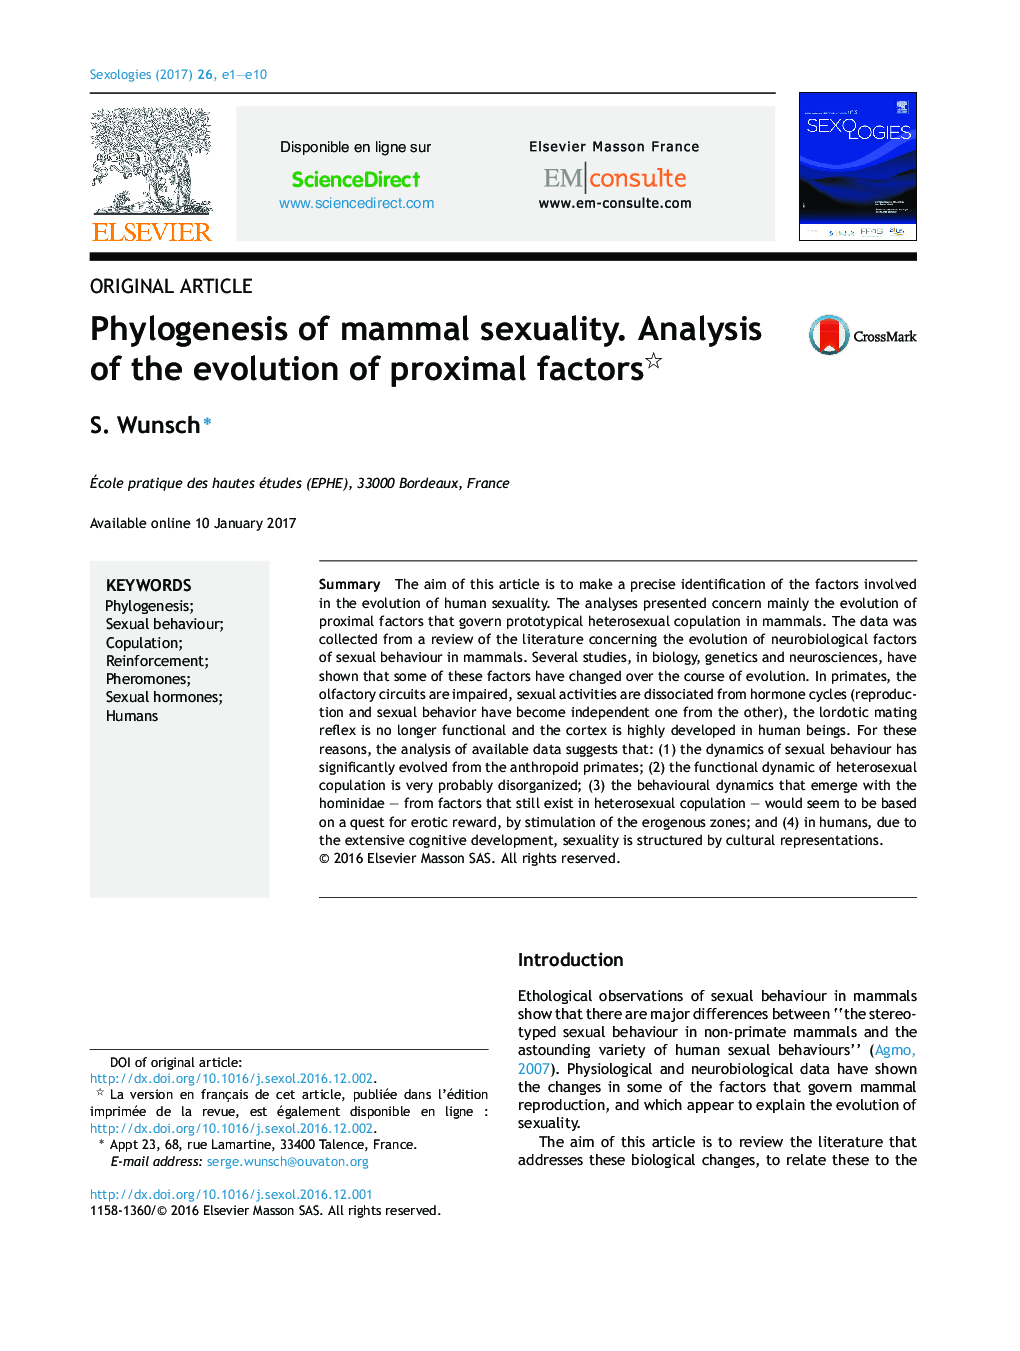 Original articlePhylogenesis of mammal sexuality. Analysis of the evolution of proximal factors